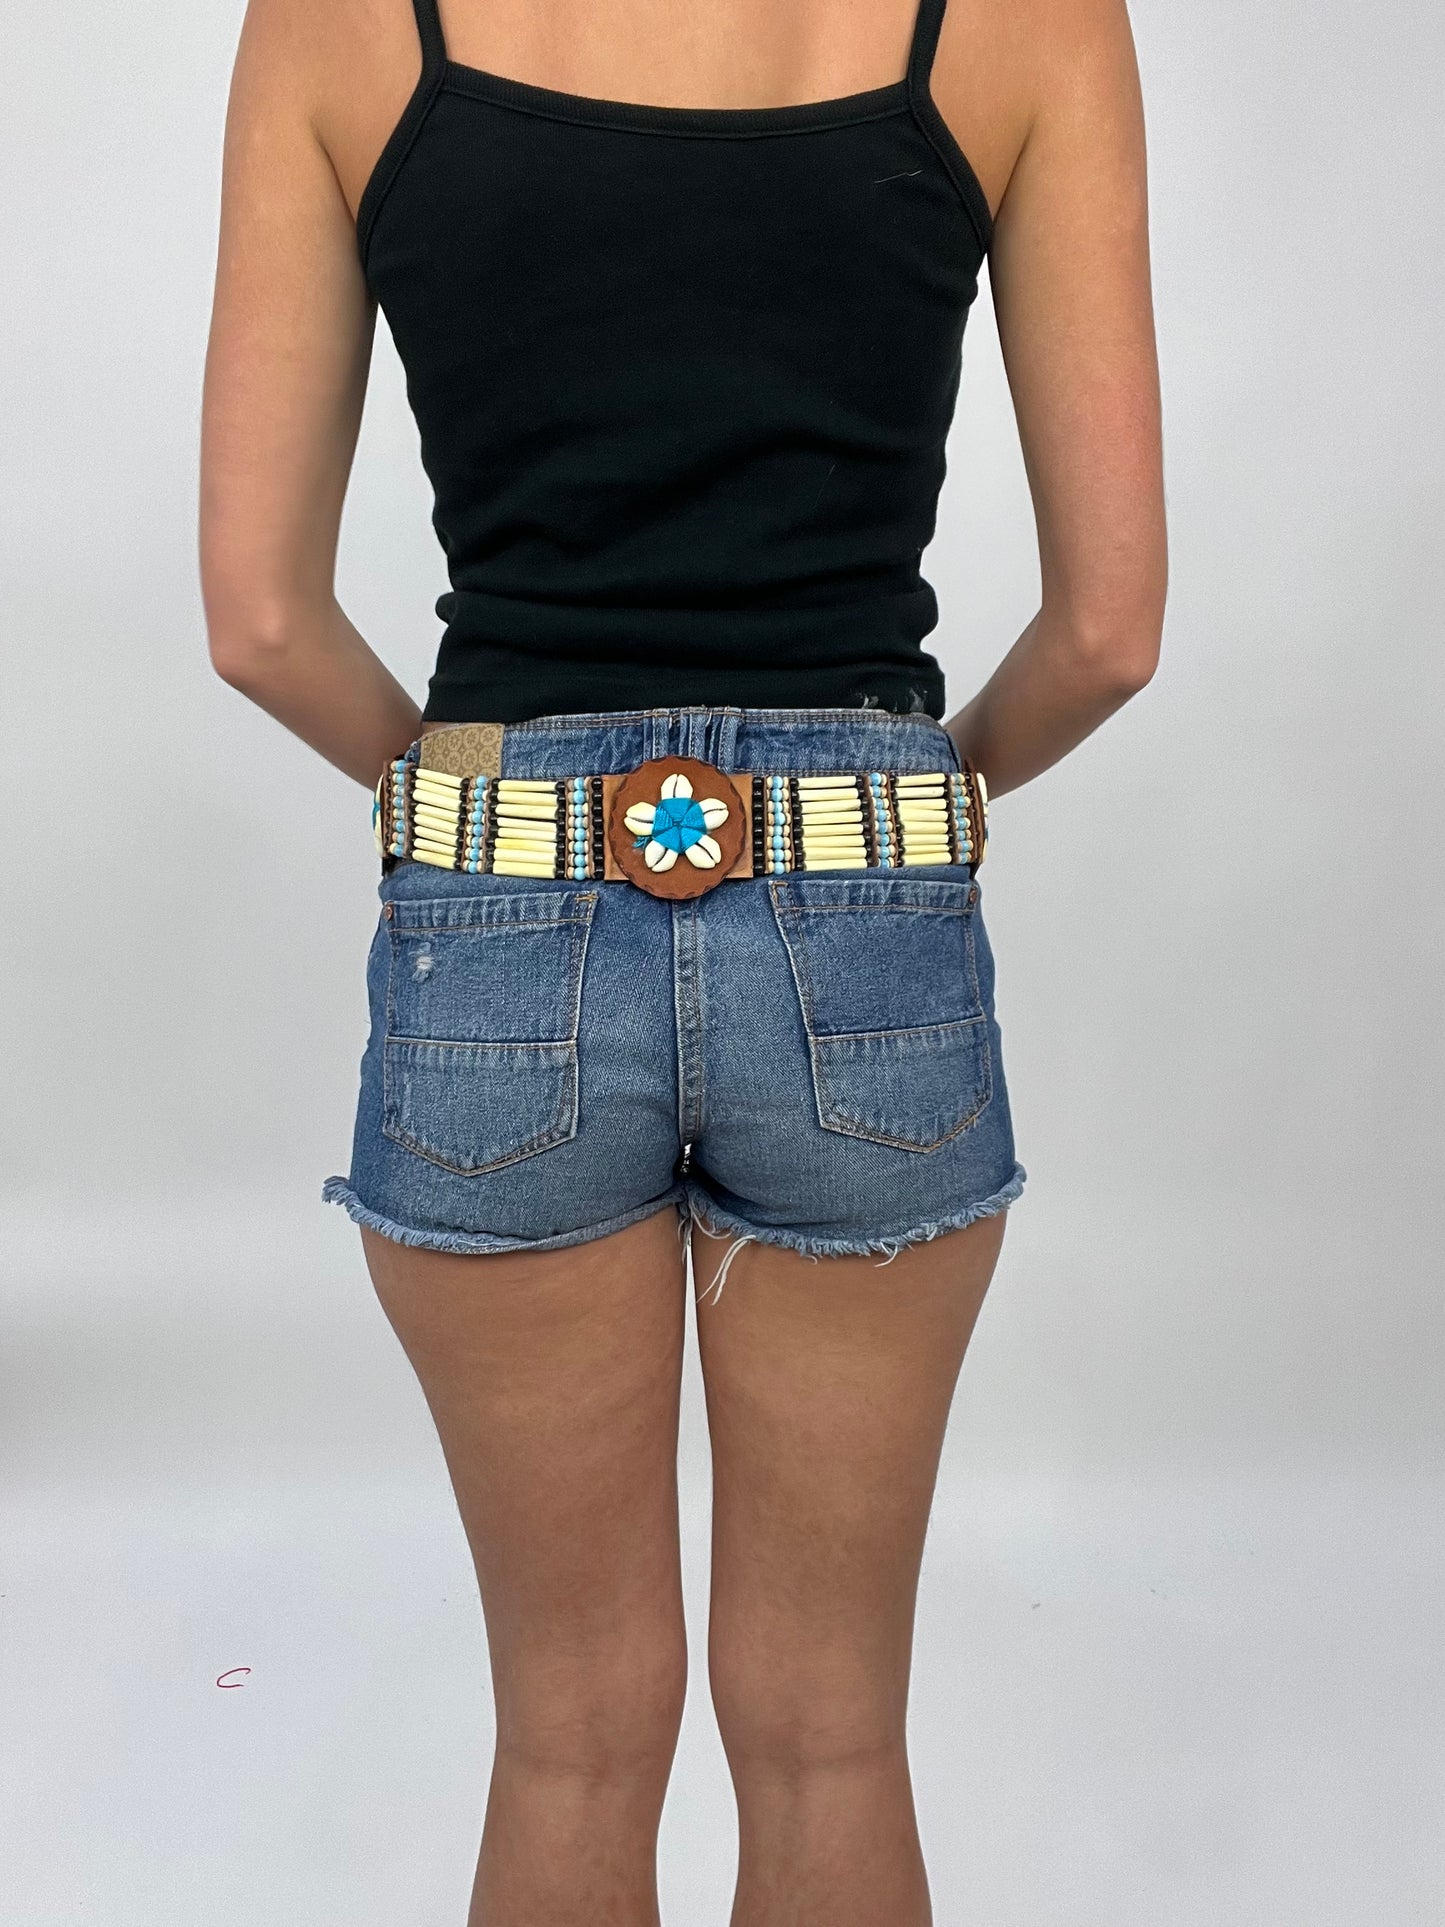 COCONUT GIRL DROP | #20 shell belt beige and brown beaded belt with shells